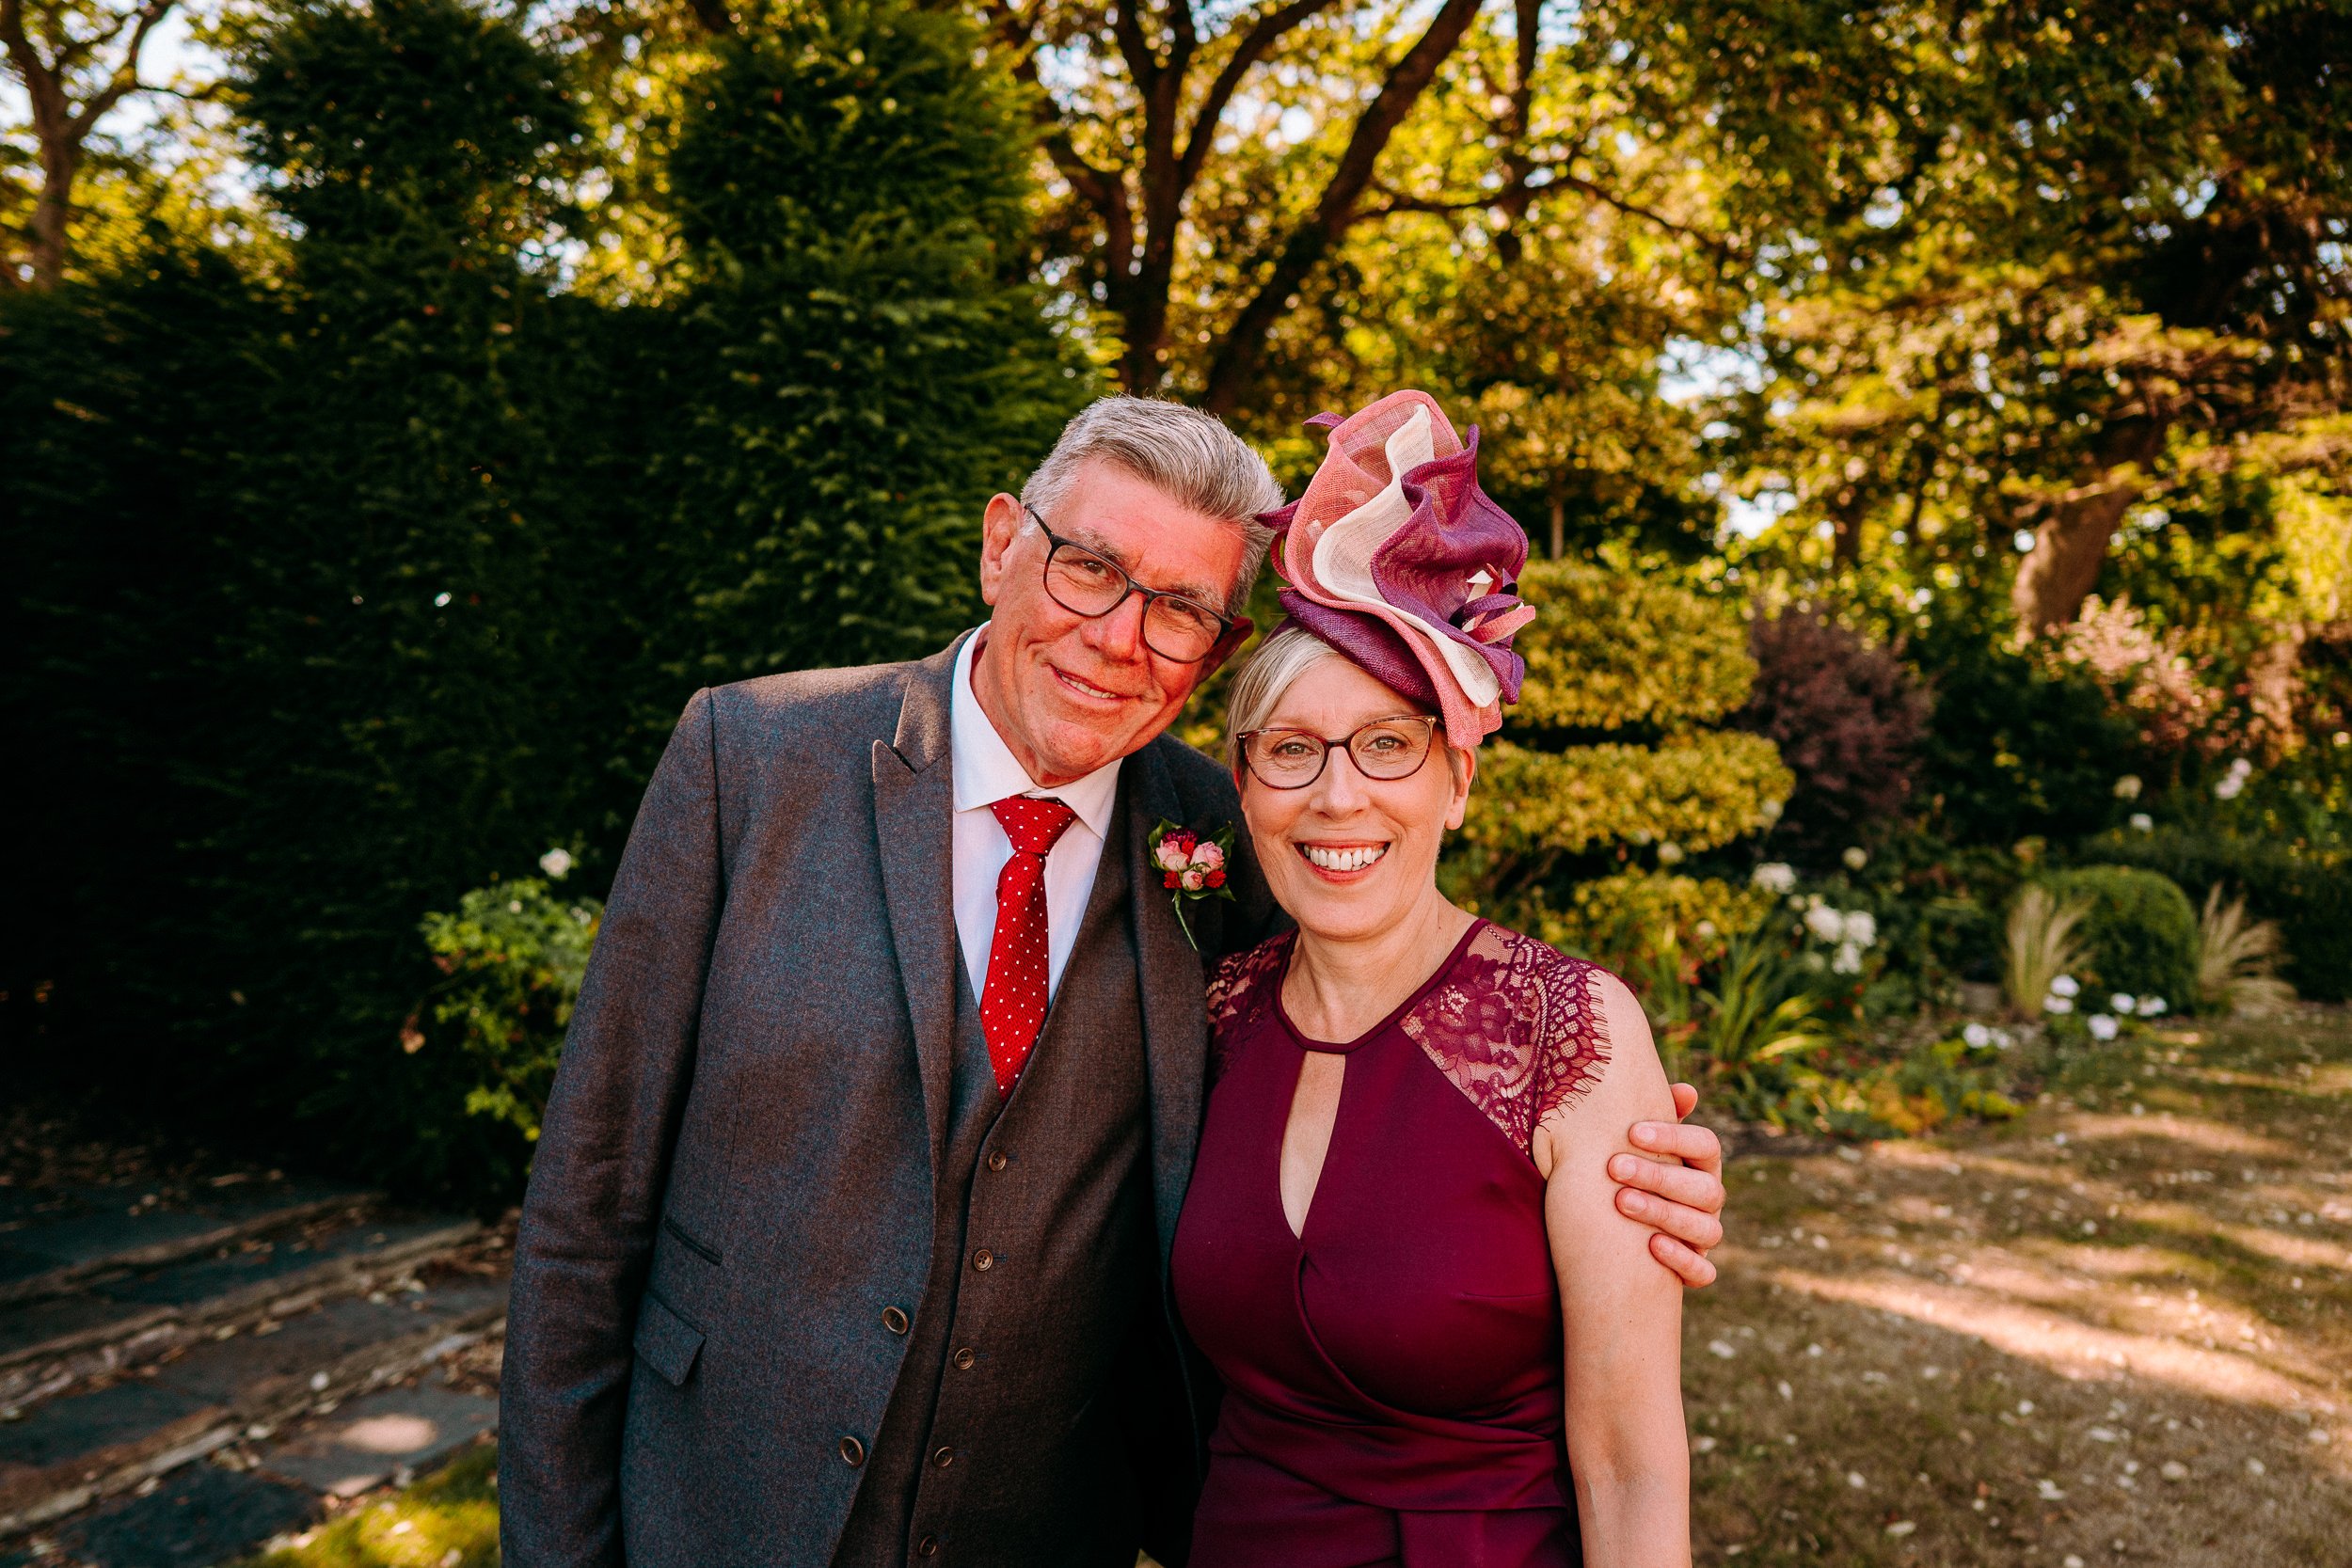  relaxed colourful natural wedding photography gileston manor south wales 